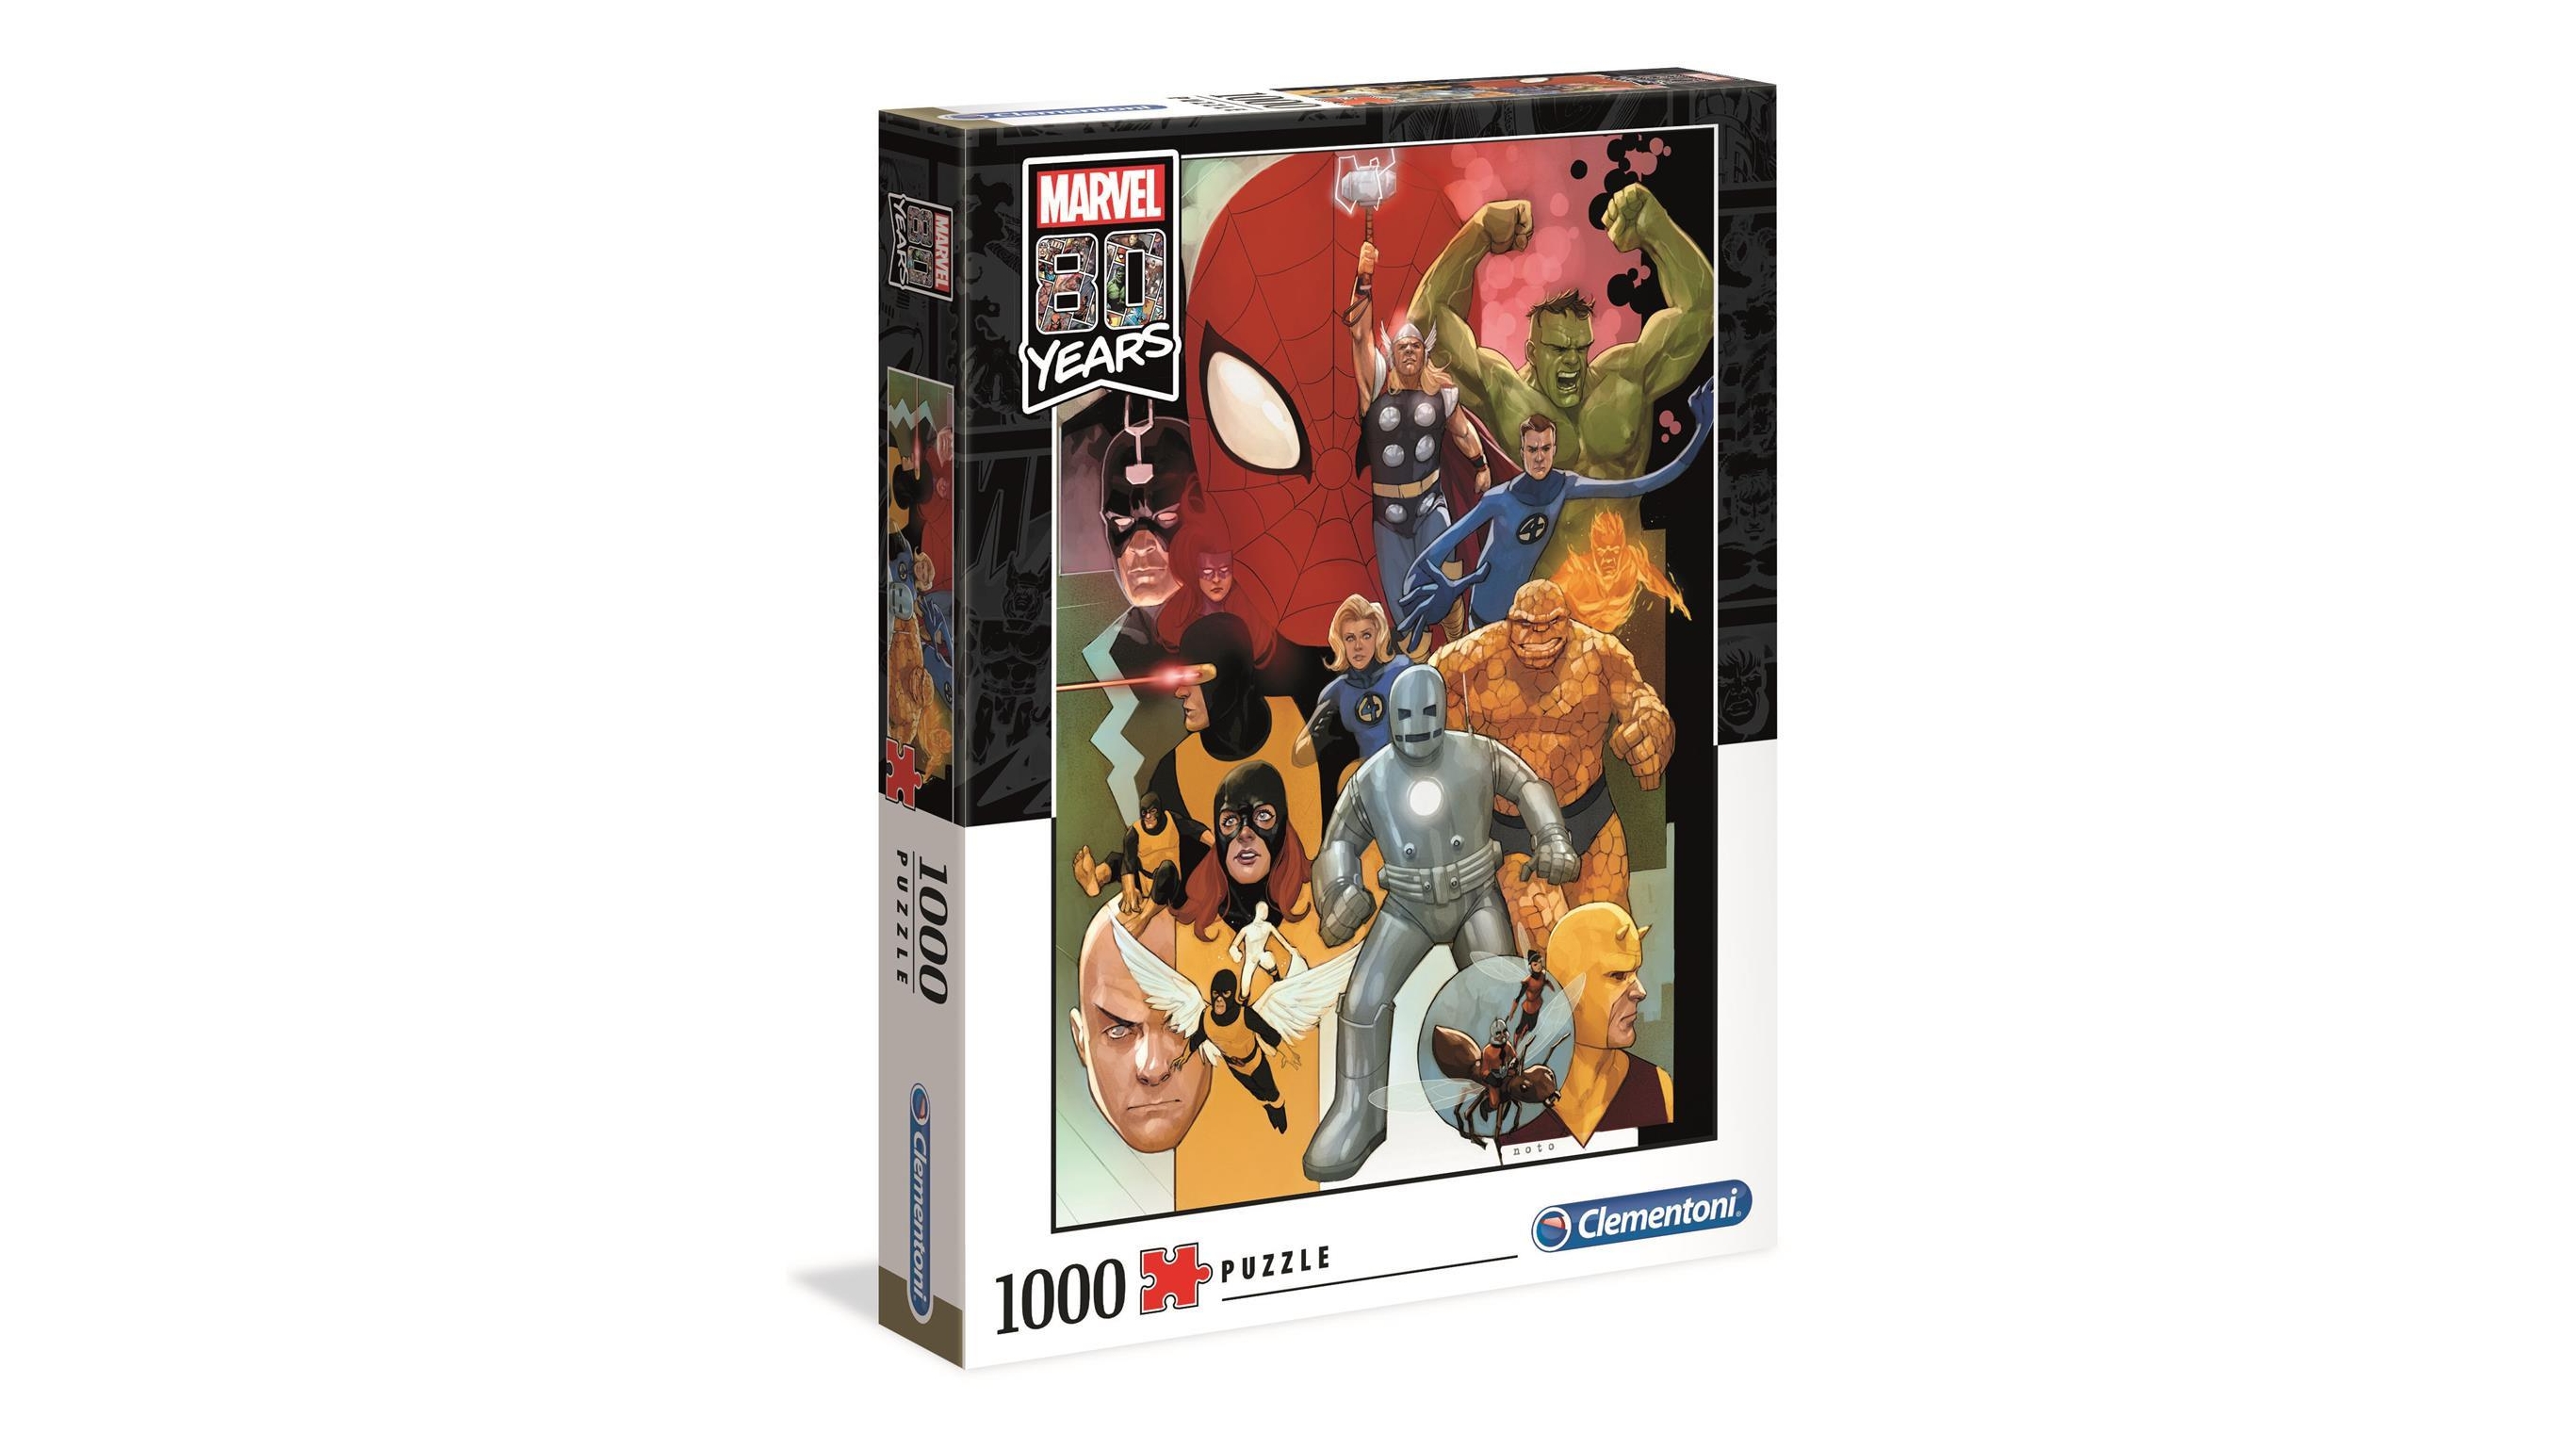 Marvel Impossible Jigsaw Puzzle by Clementoni 1000 pieces NEW 